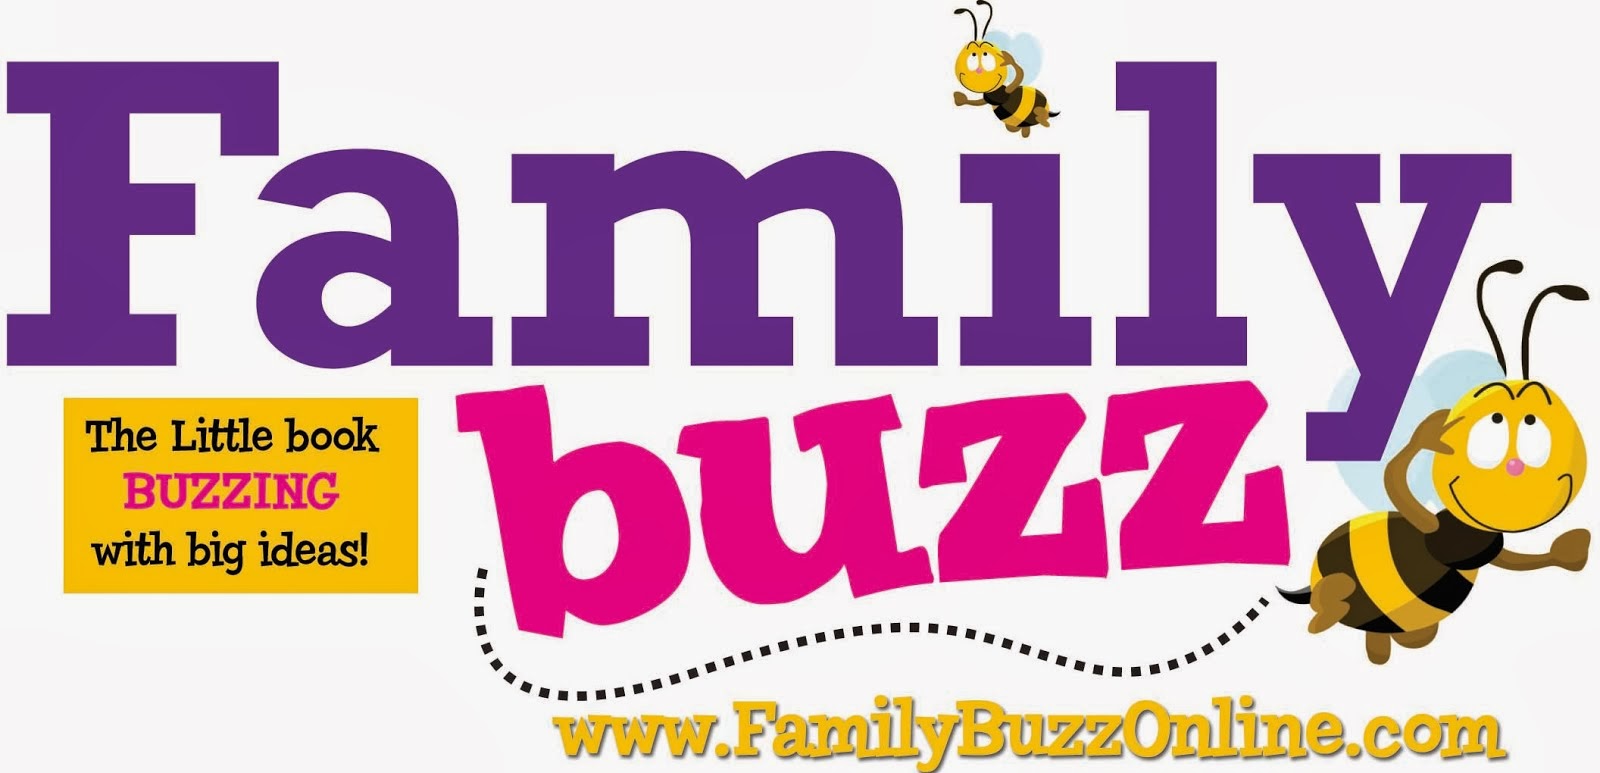 See Me on Family Buzz!